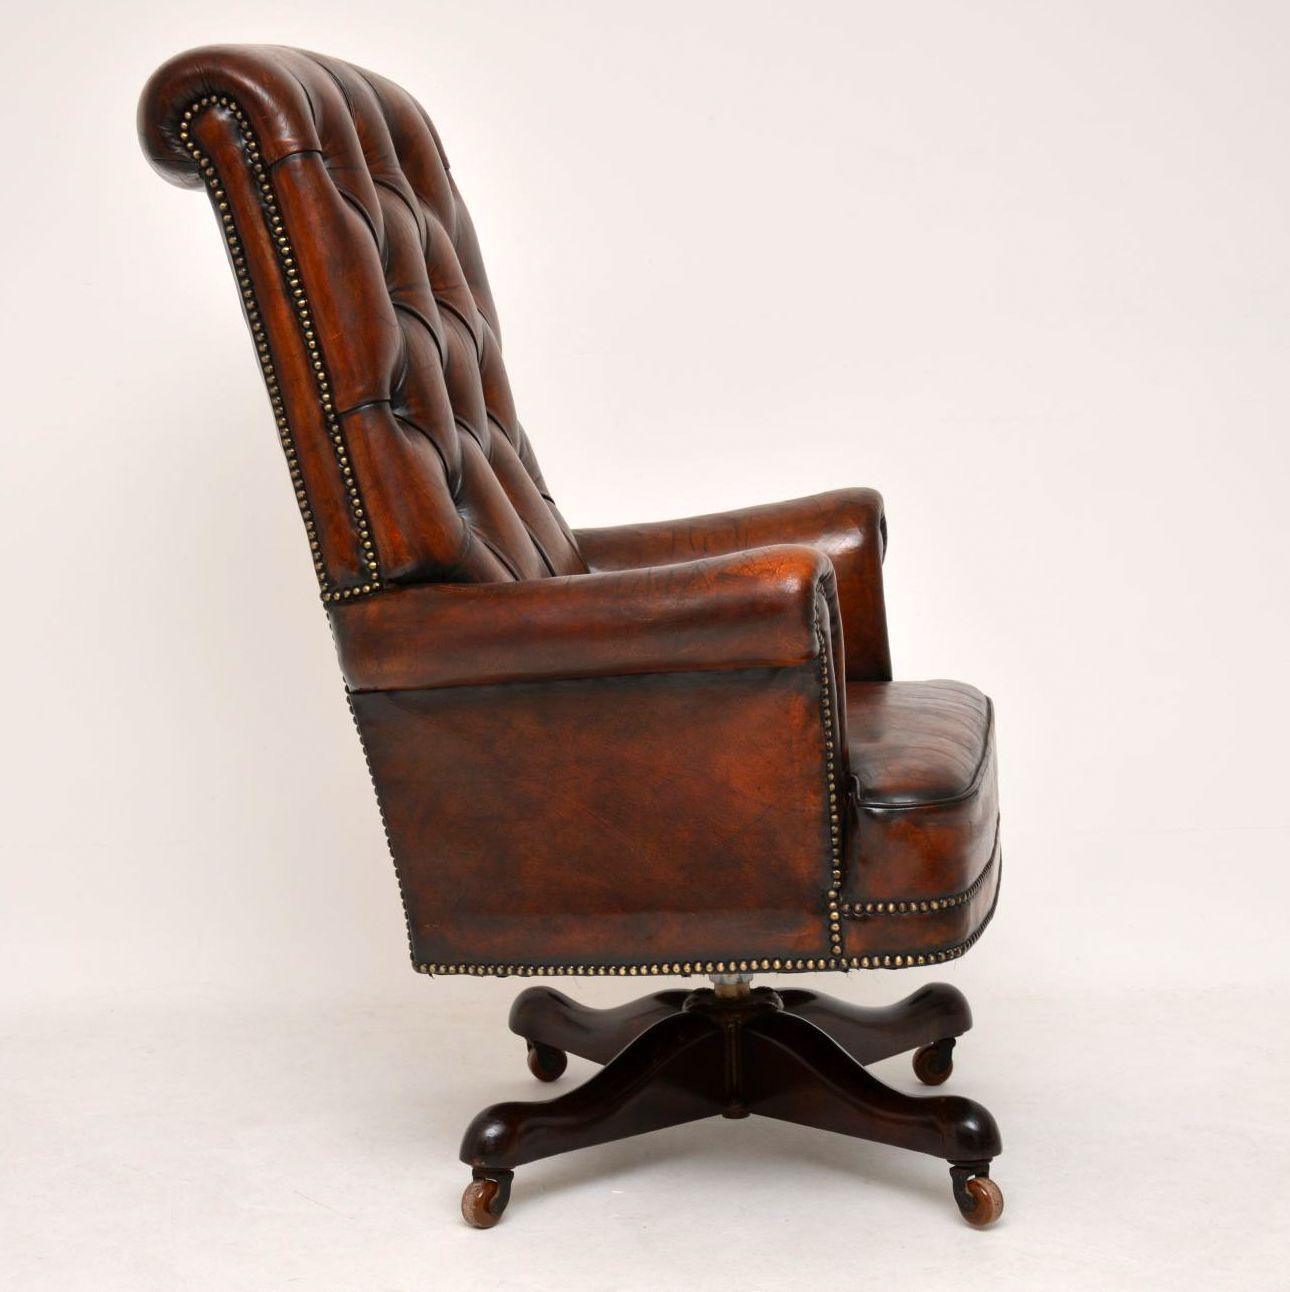 English Antique Leather and Mahogany Swivel Desk Chair